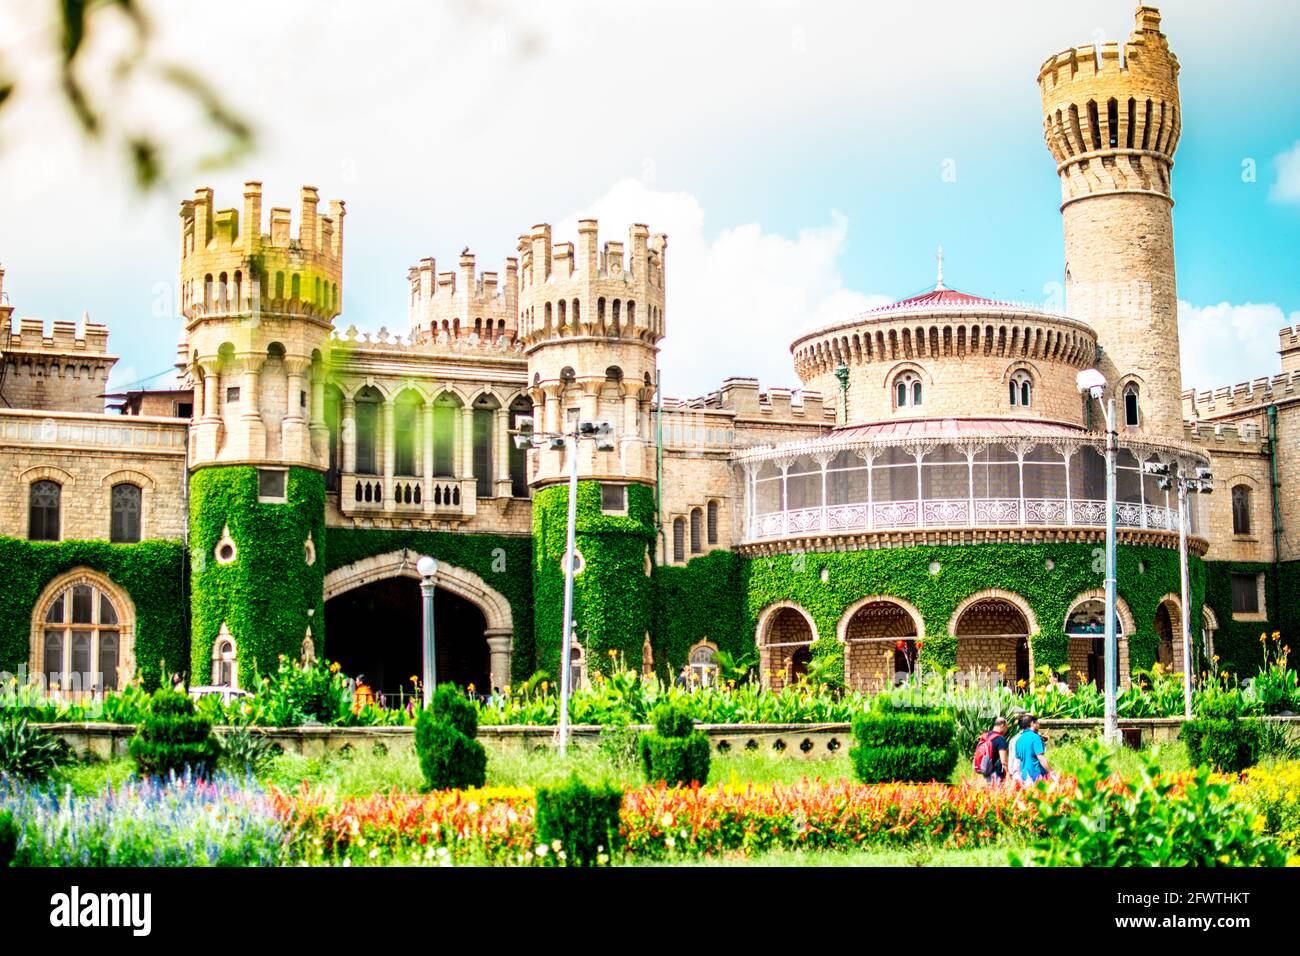 Bangalore Palace is a royal palace located in Bengaluru, Karnataka, India, in an area that was owned by Rev. J. Garrett, the first principal of the Ce Stock Photo